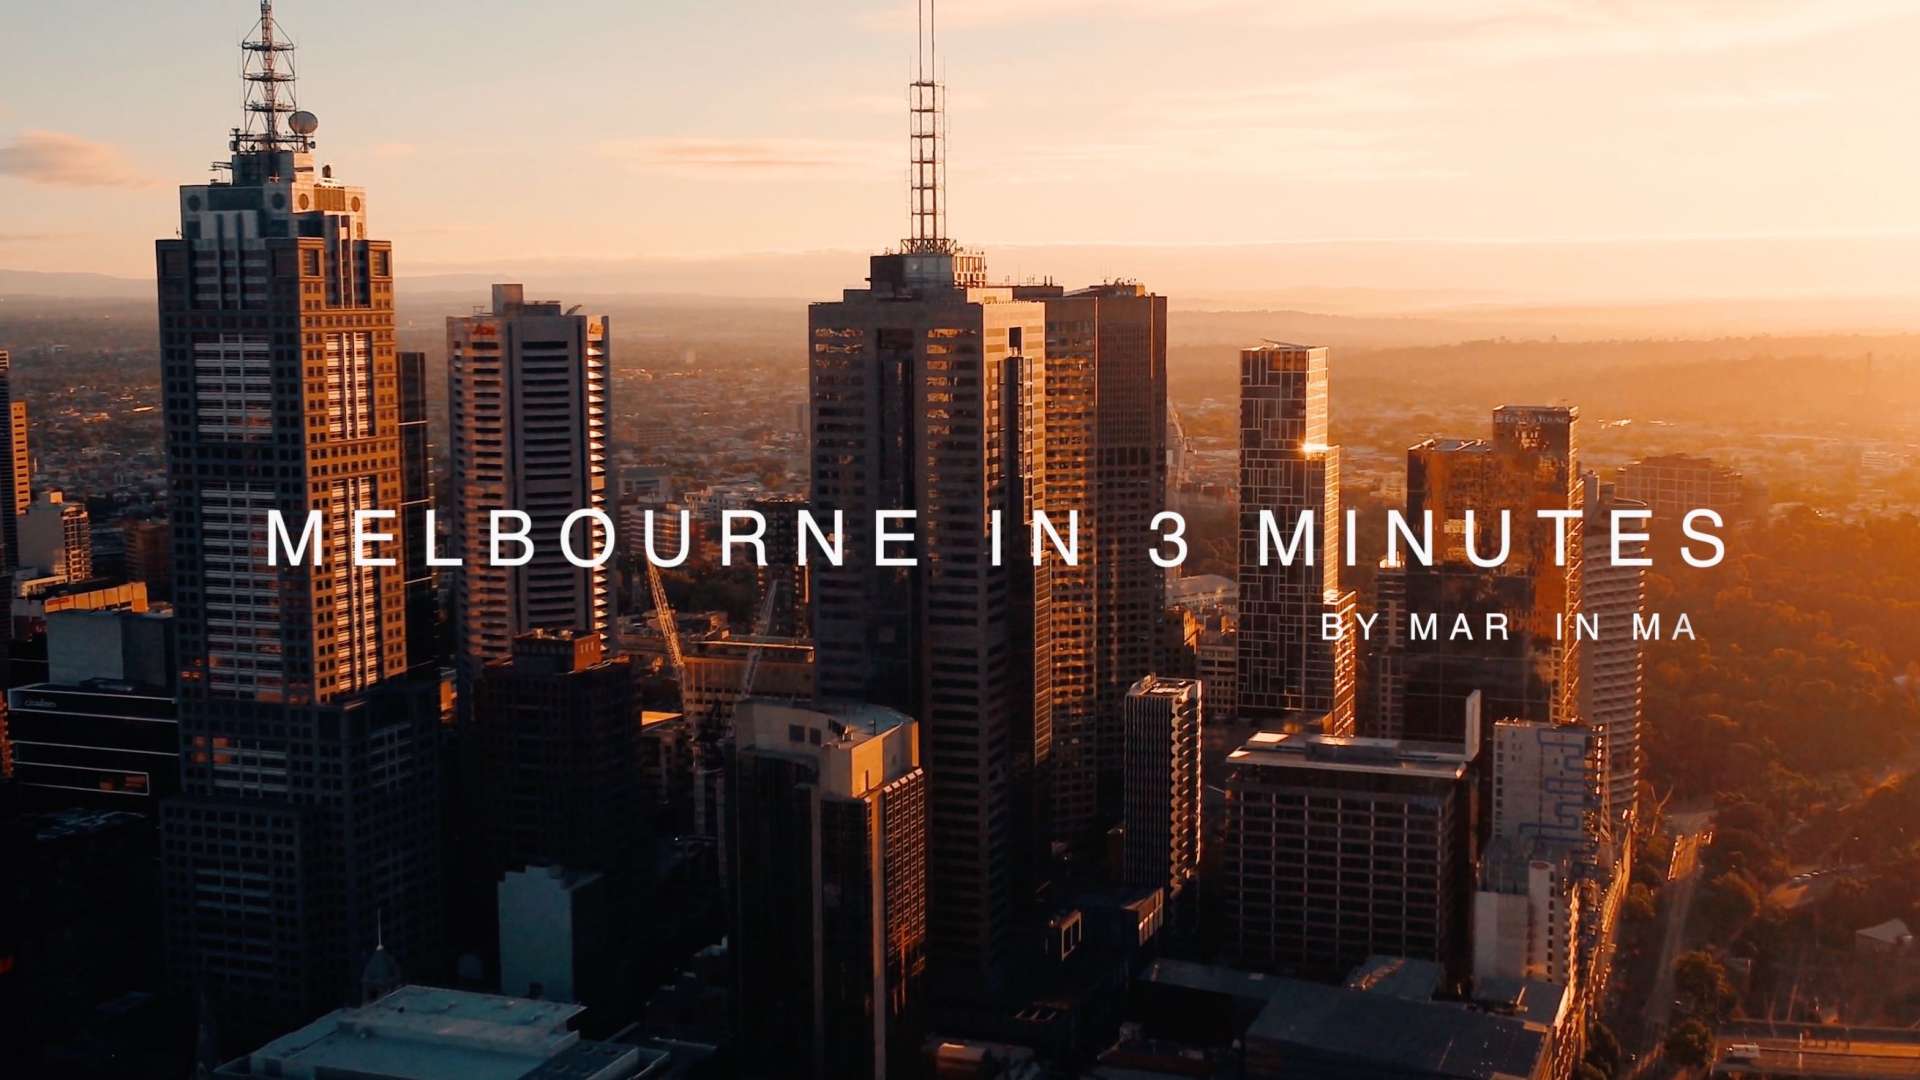 Melbourne in 3 minutes